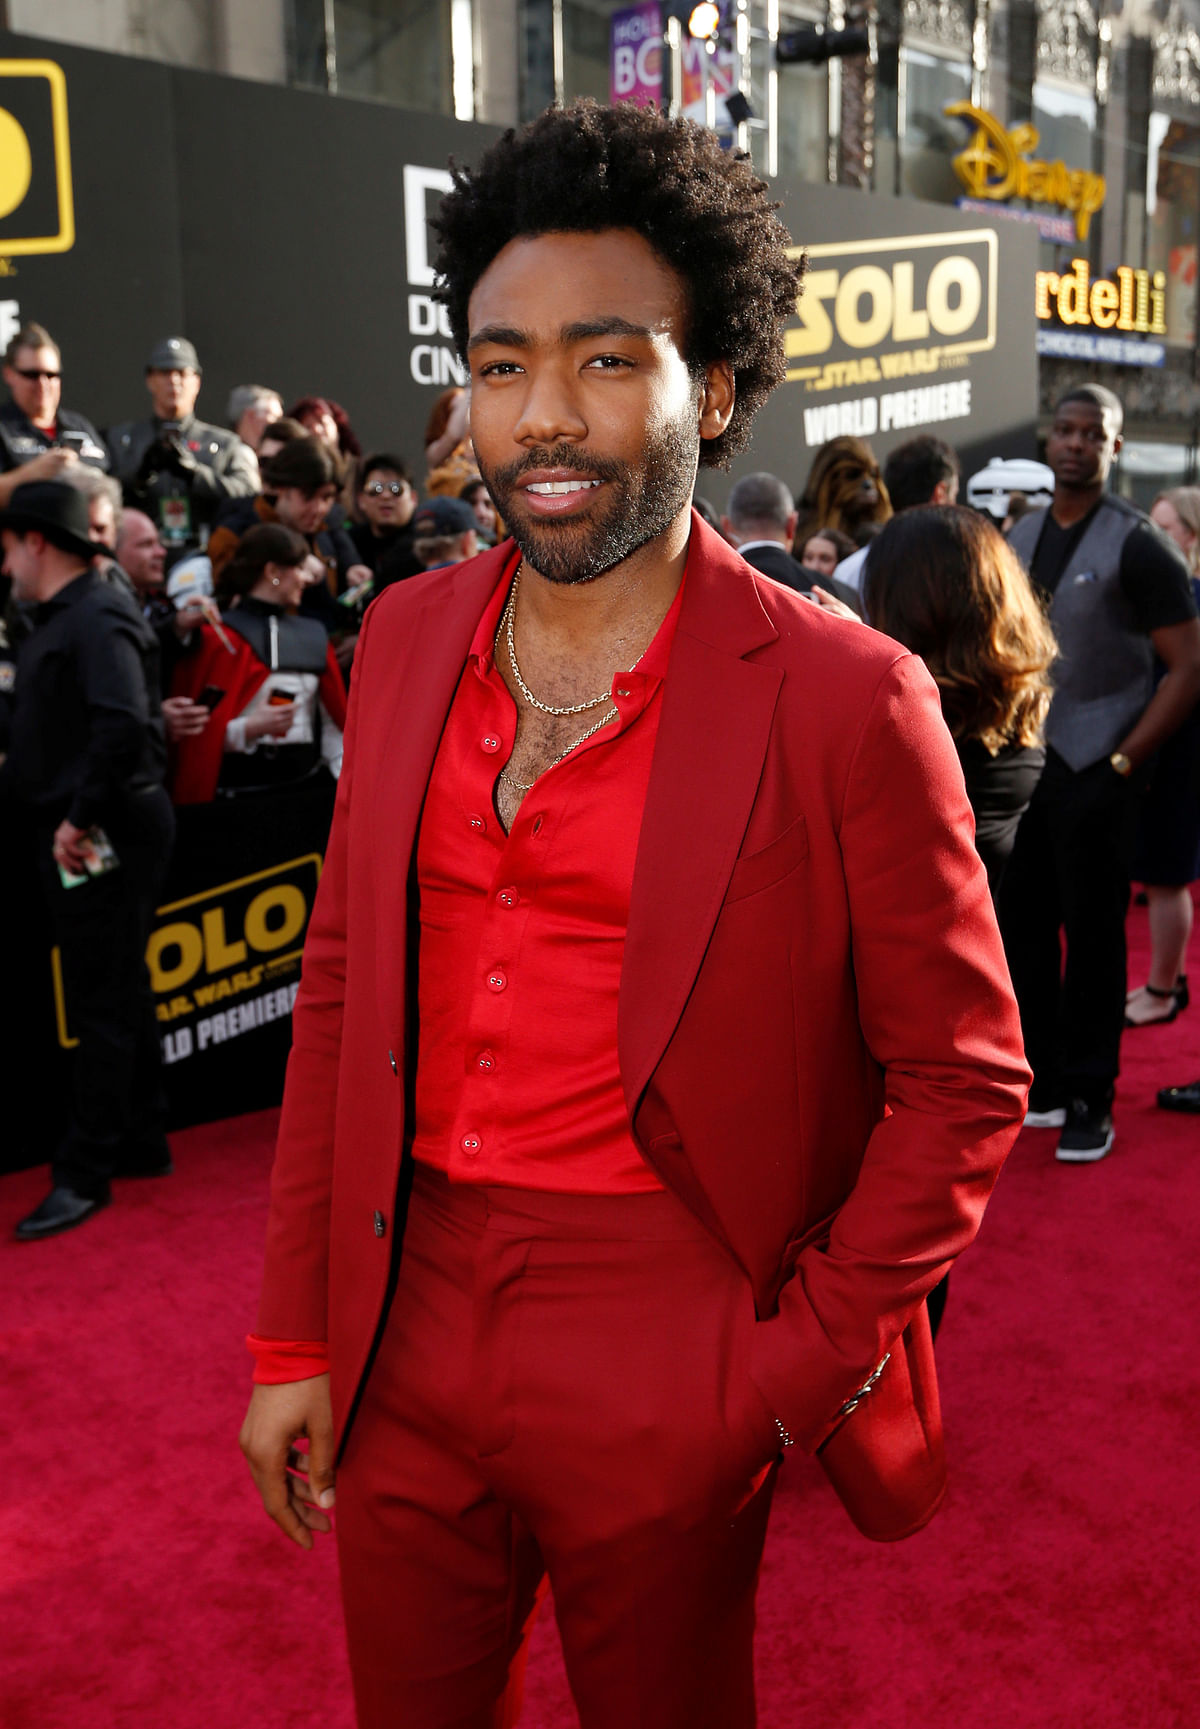 Cast member Donald Glover poses at the premiere for the movie `Solo: A Star Wars Story` in Los Angeles, California, US, 10 May, 2018. Photo: Reuters